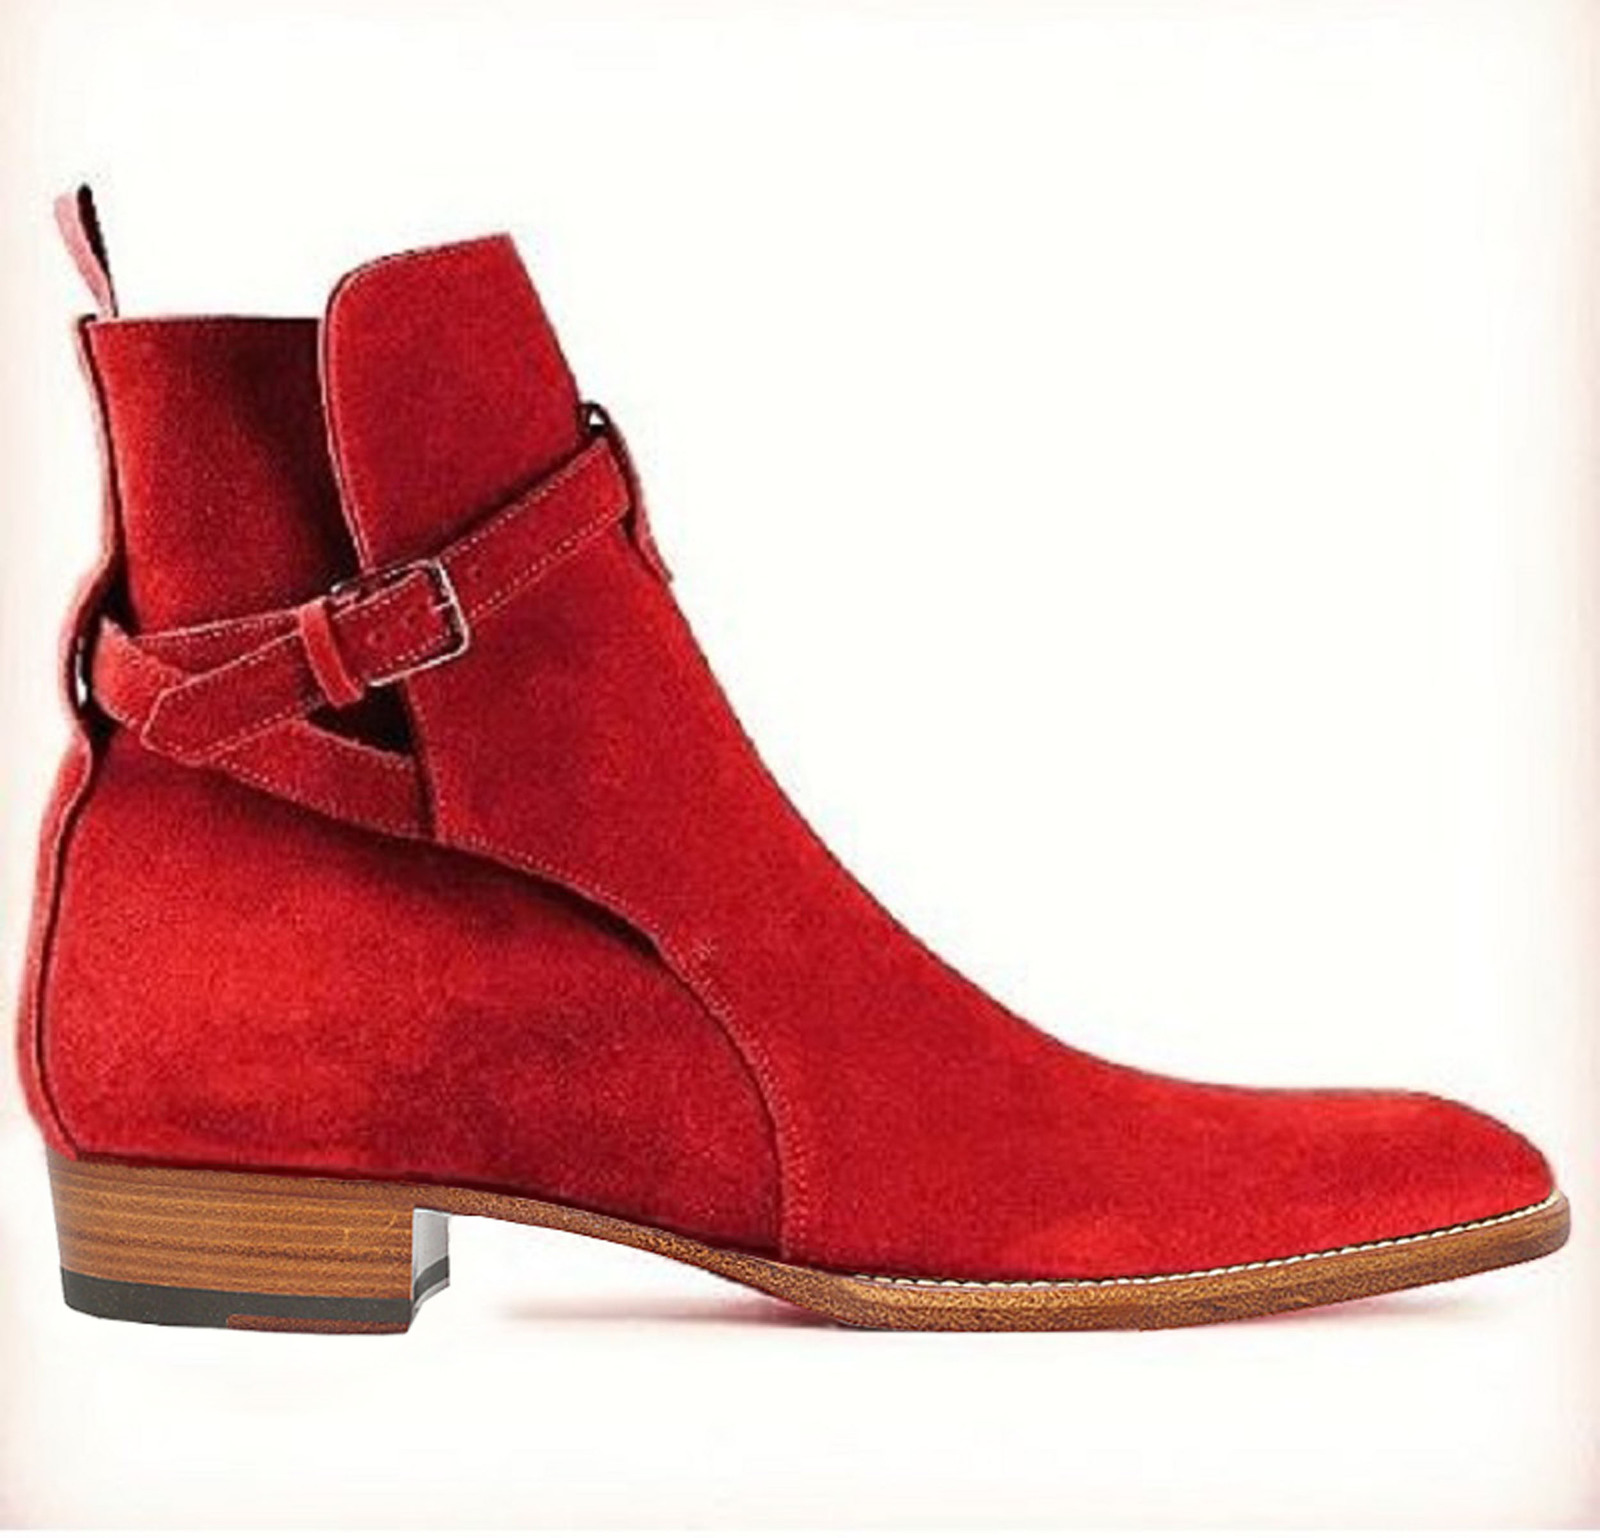 Handmade jodhpurs ankle boot Men red ankle high suede leather boot Mens ...